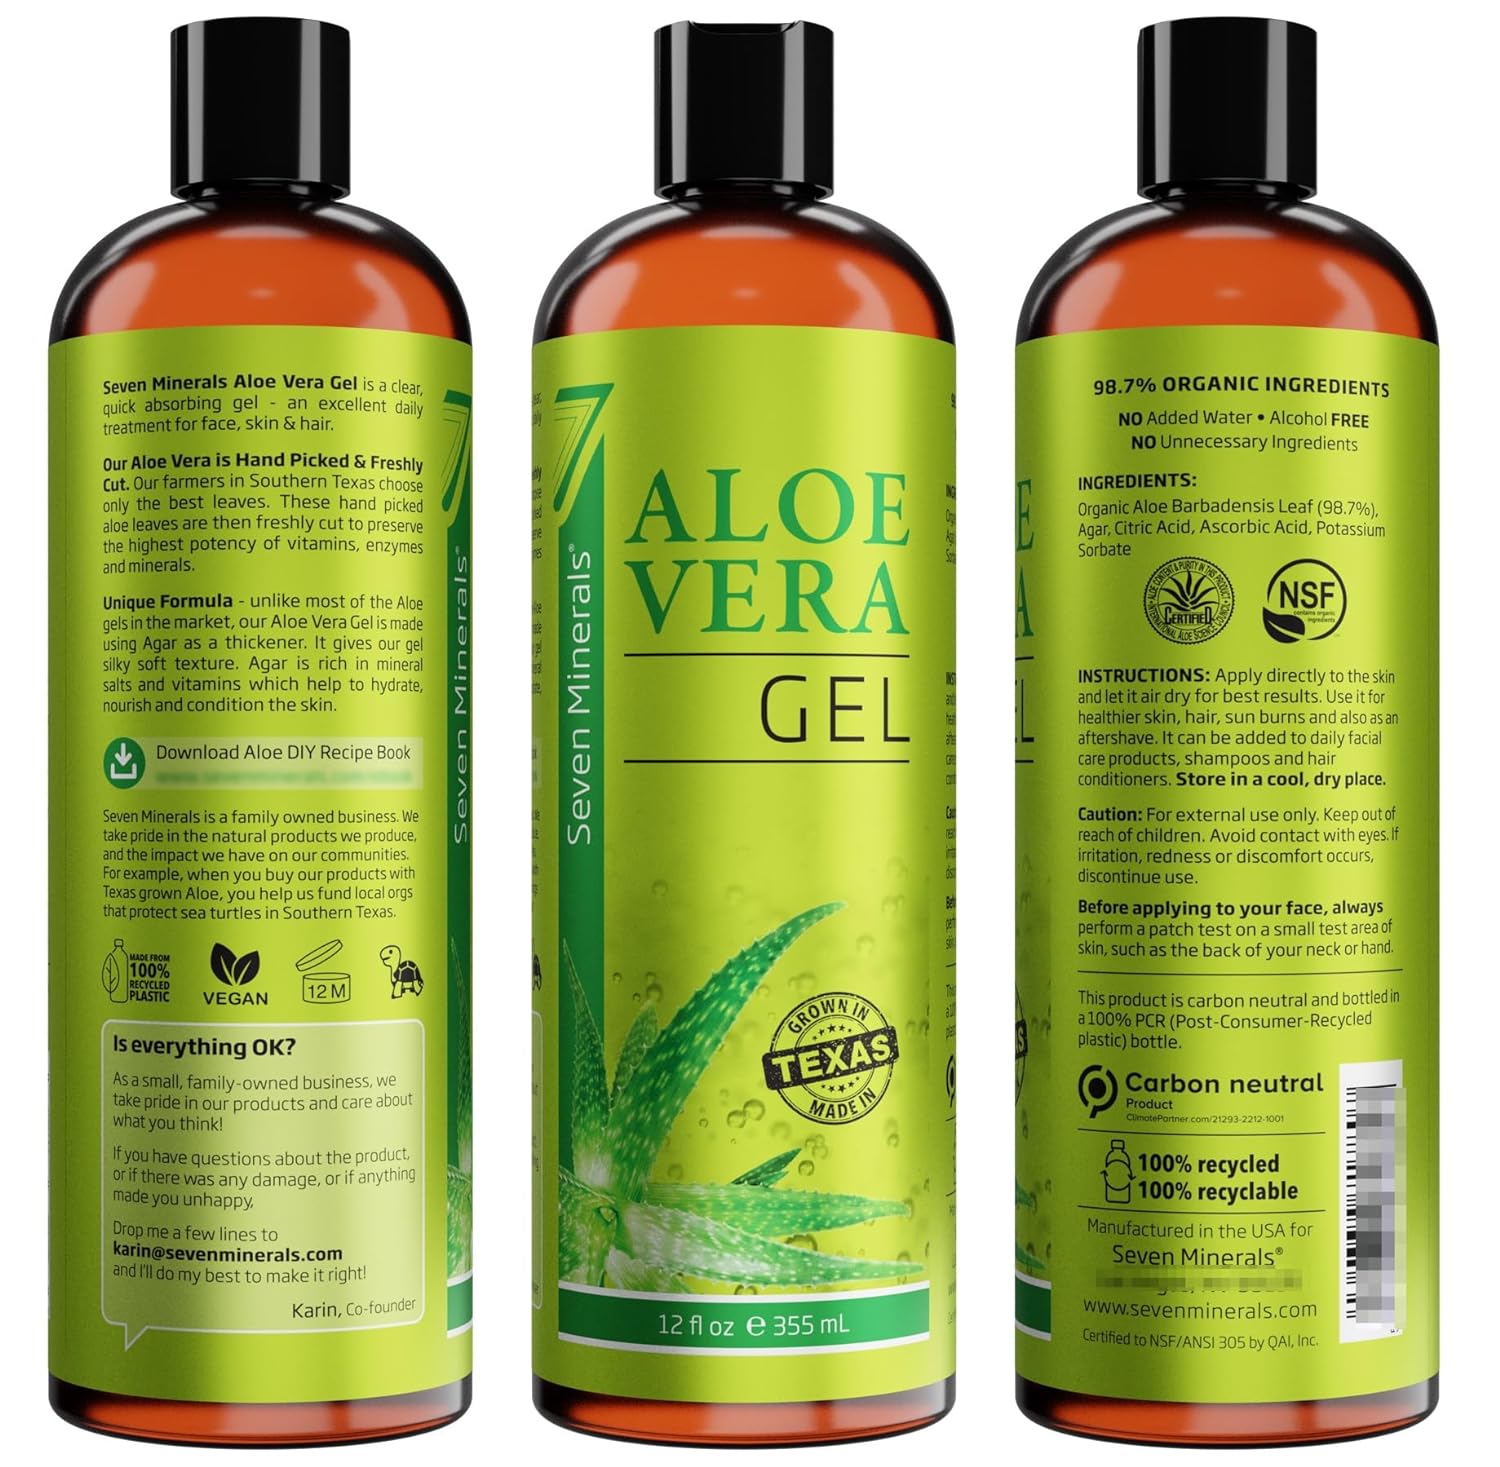 Seven Minerals Organic Aloe Vera Gel with 100% Pure Aloe From Freshly Cut Aloe Plant, Not Powder - No Xanthan, So It Absorbs Rapidly with No Sticky Residue - Big 12 fl oz - image 5 of 5